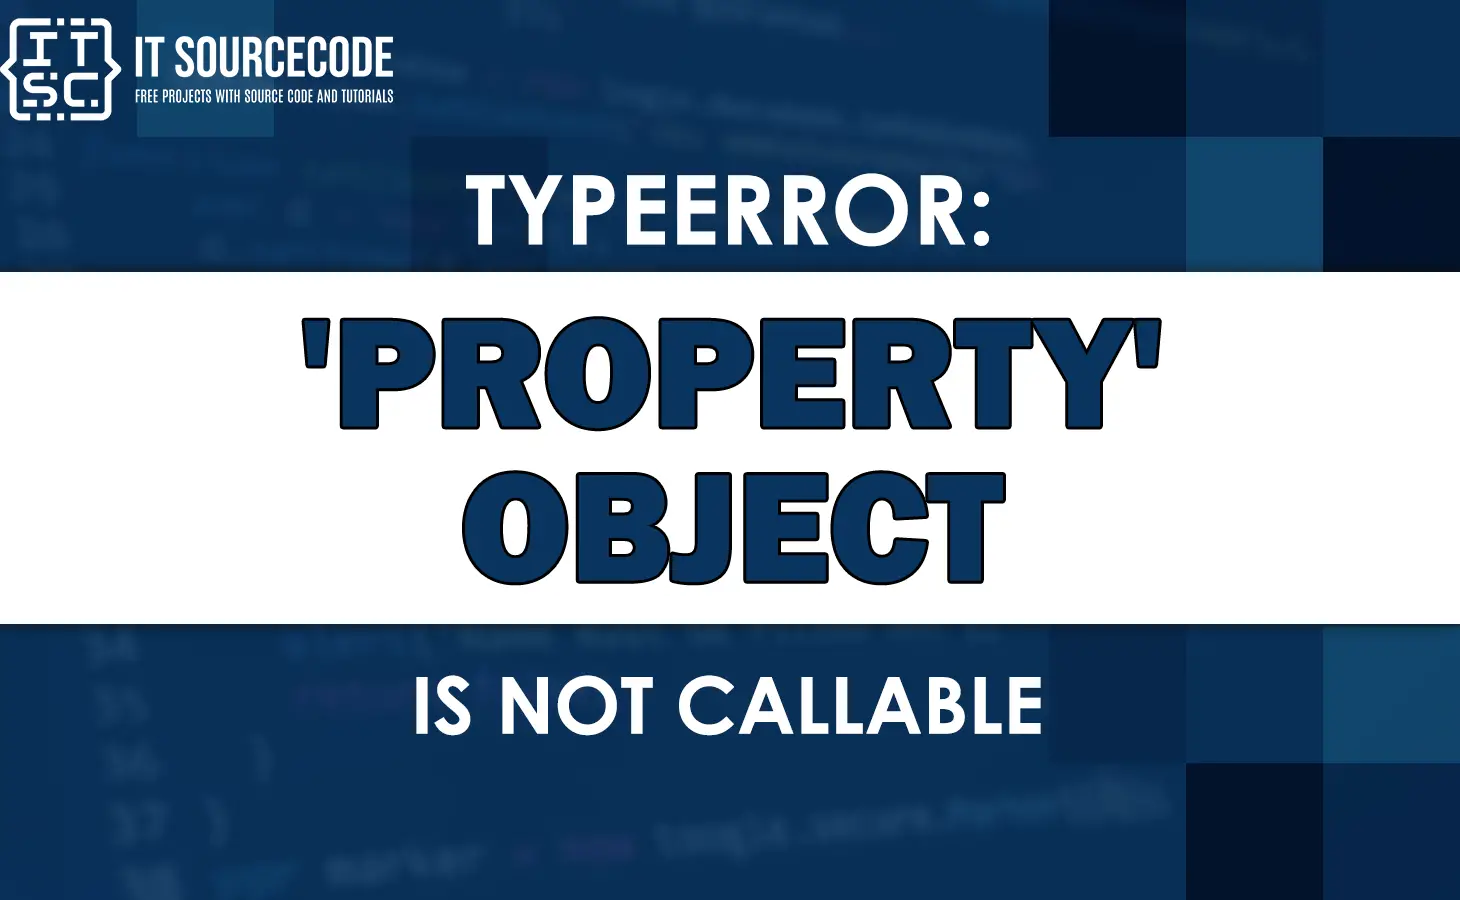 Typeerror: property object is not callable [SOLVED]